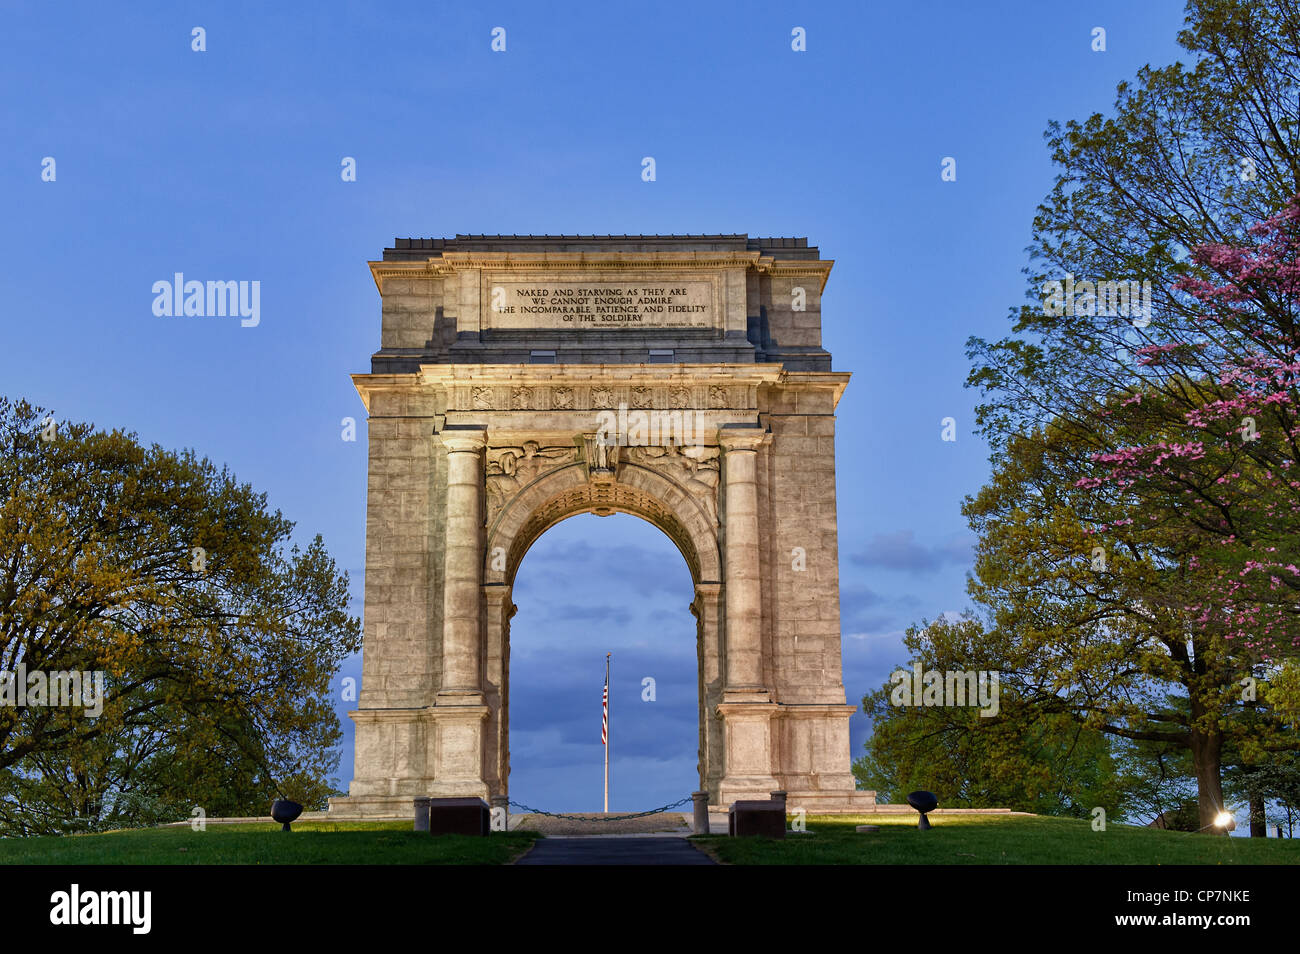 National Memorial Arch, Valley Forge National Historical Park, New Jersey, USA Banque D'Images